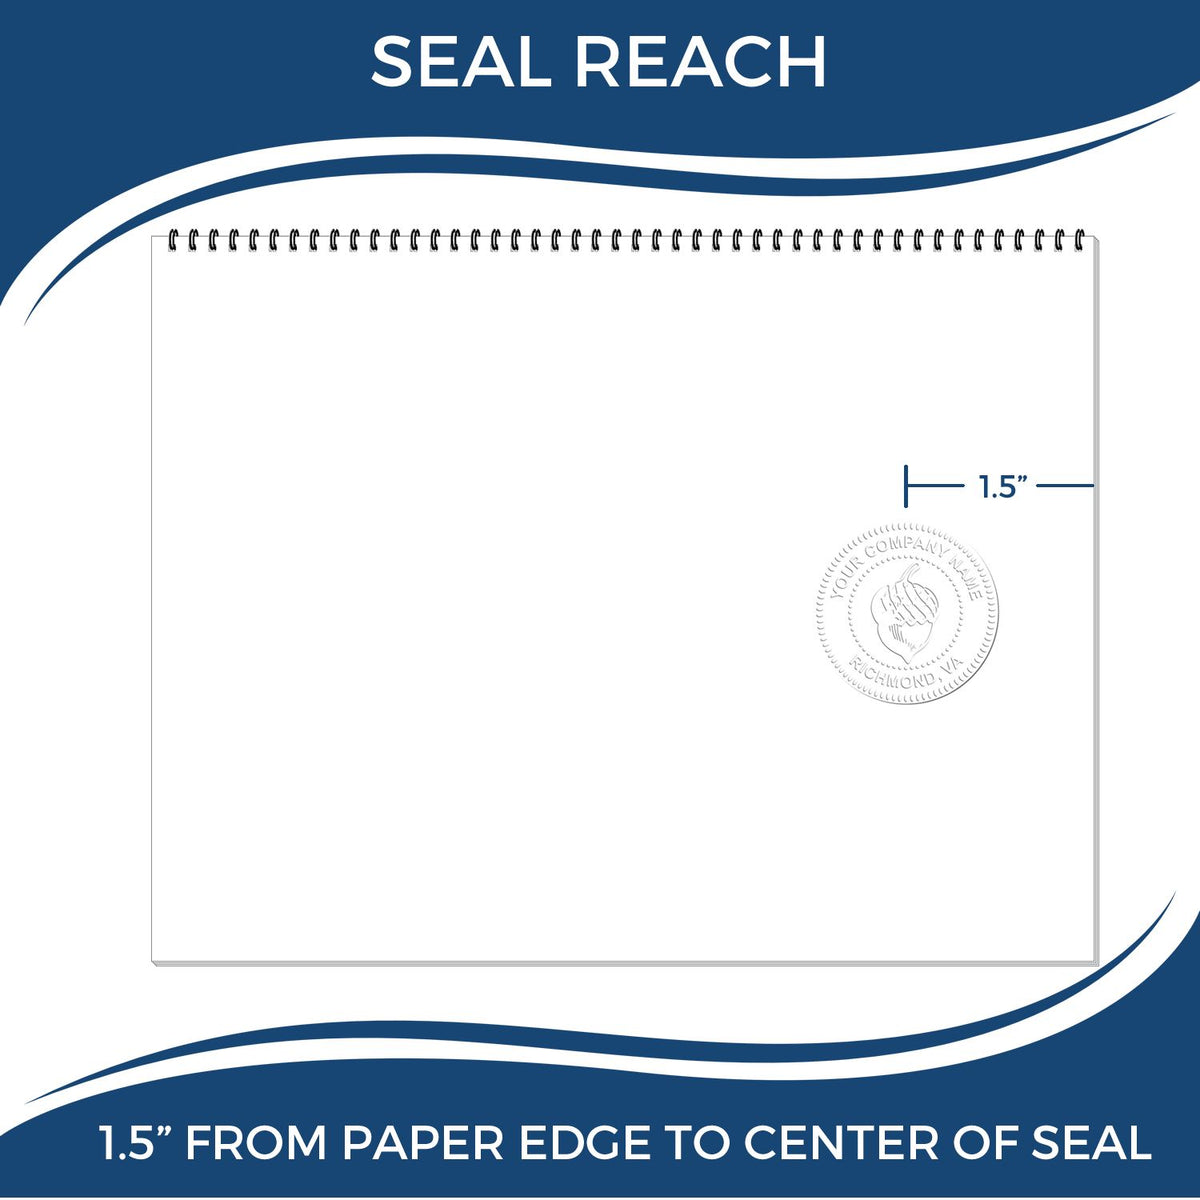 An infographic showing the seal reach which is represented by a ruler and a miniature seal image of the Hybrid Alaska Geologist Seal